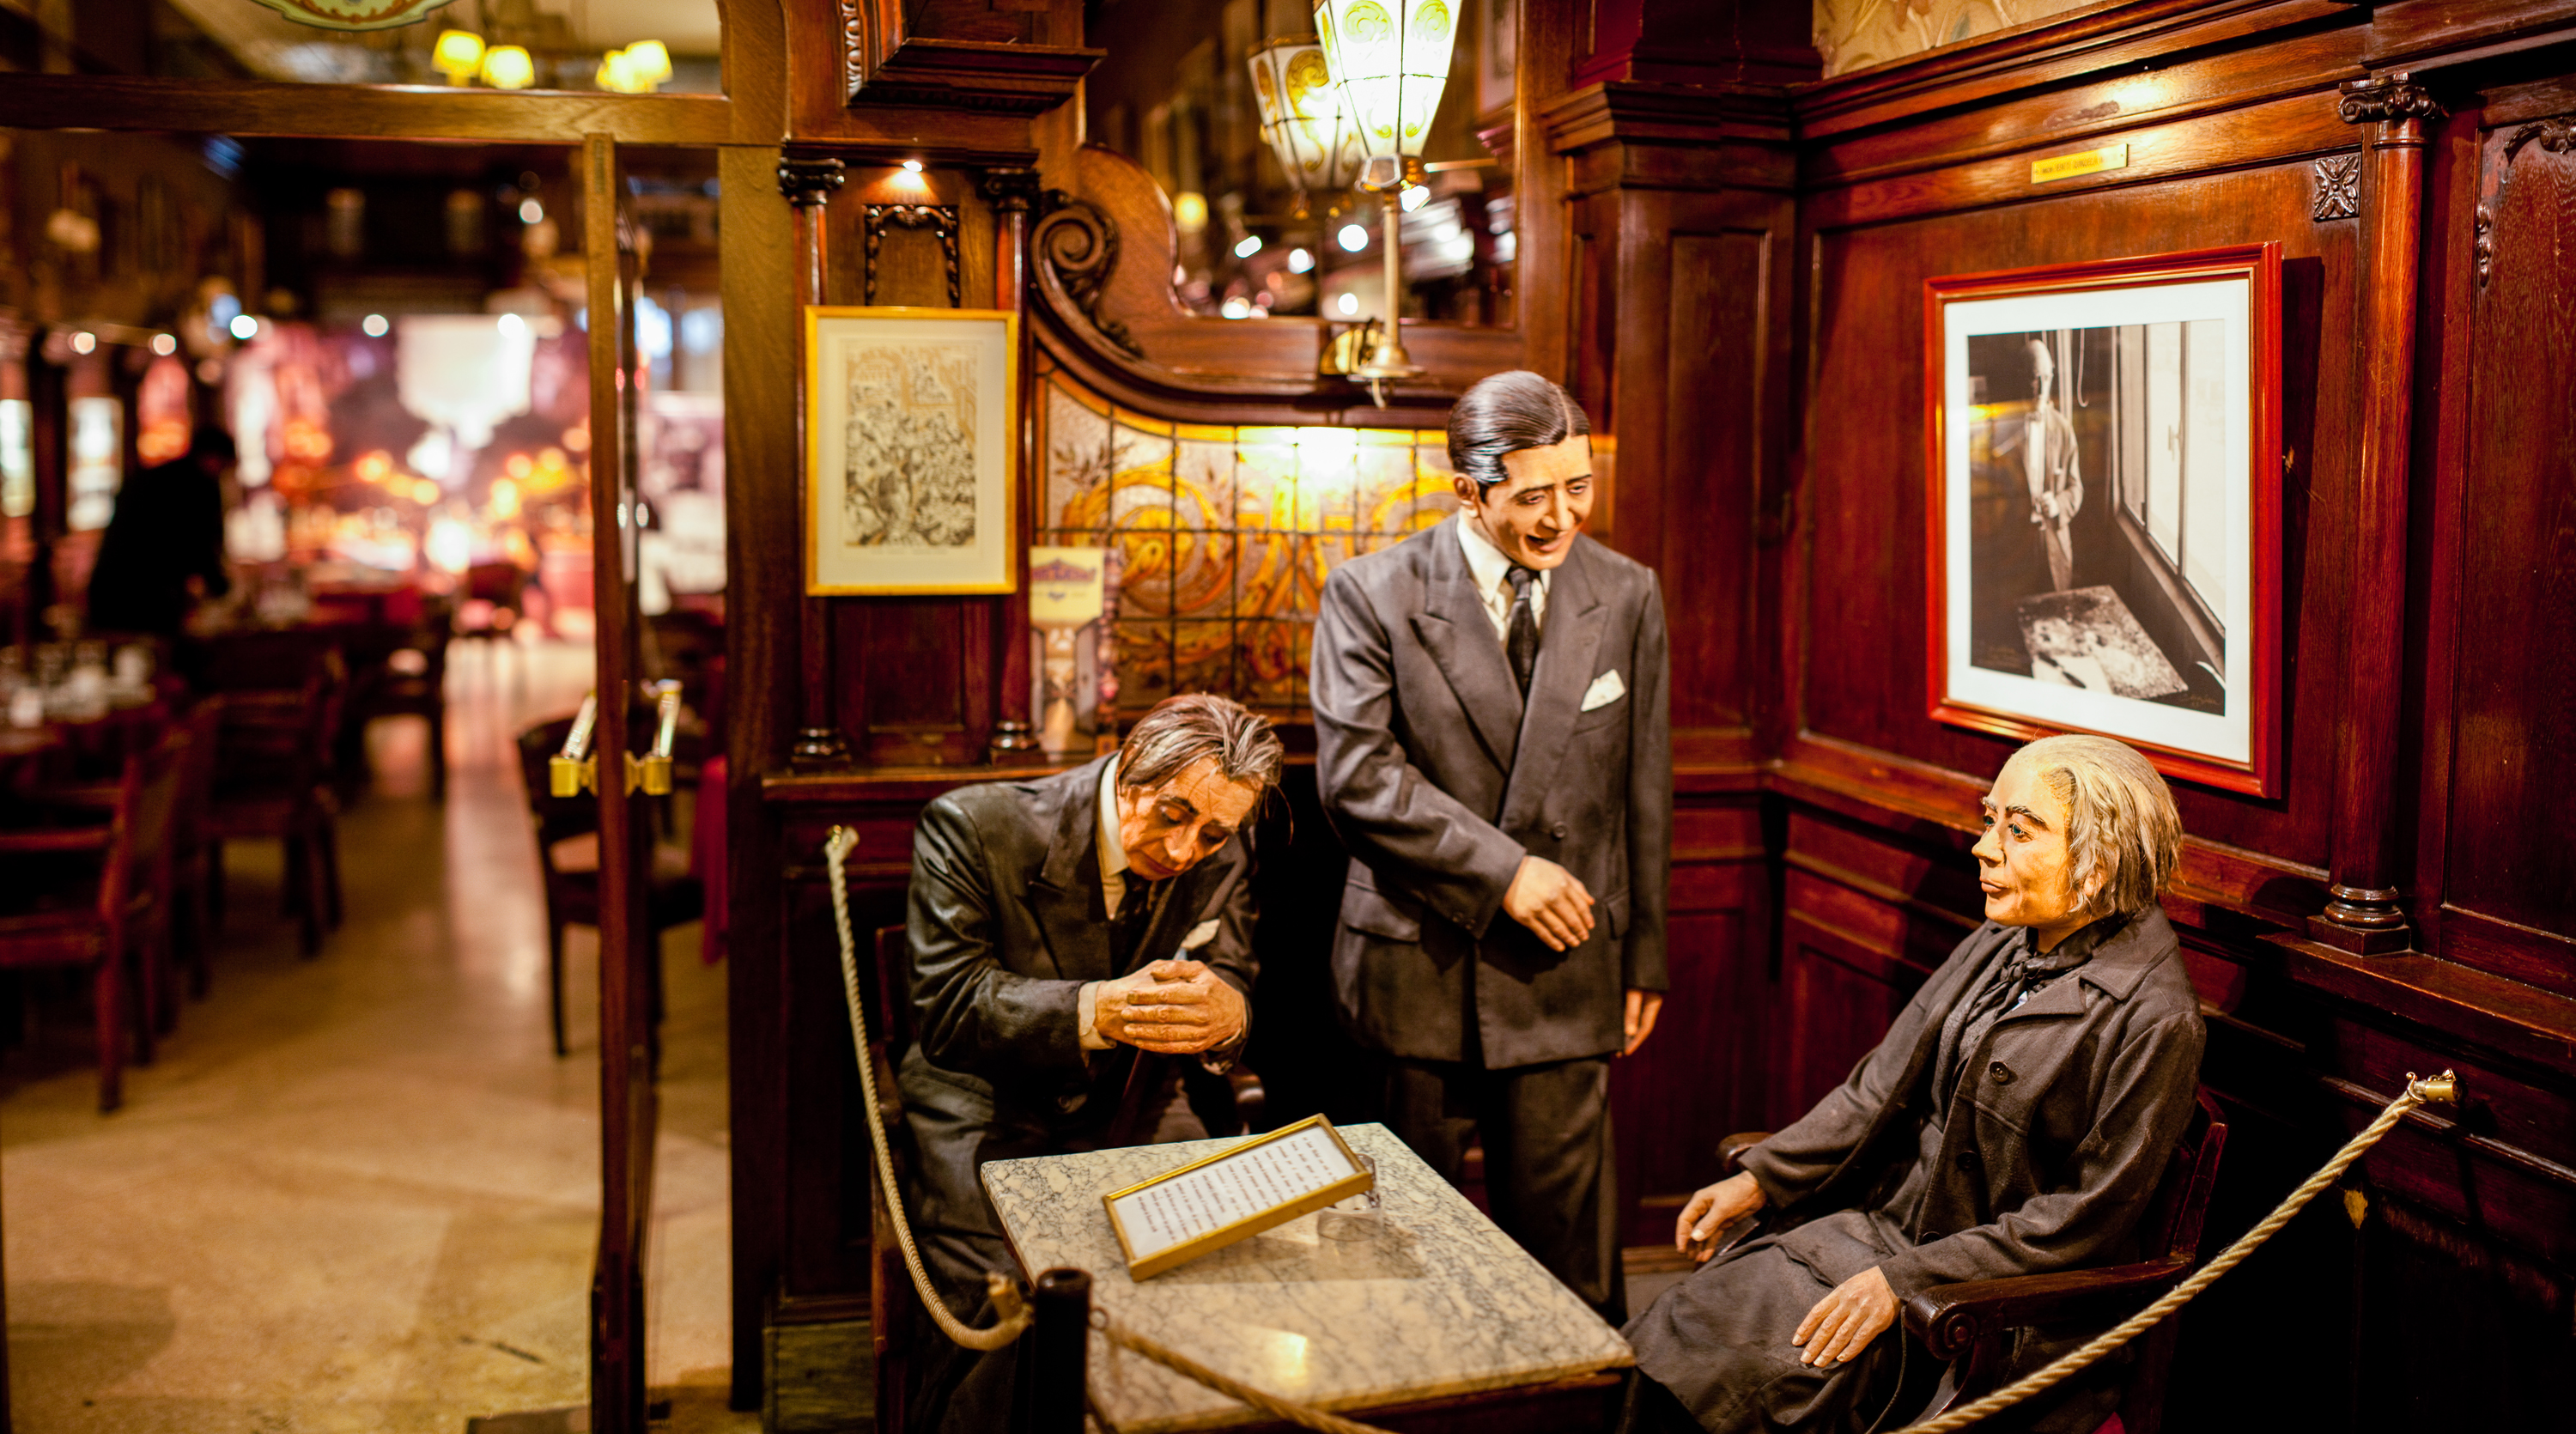 Three life sized wax figures of Borges, Gardel and Alfonsina Storni around a table in Cafe Tortoni